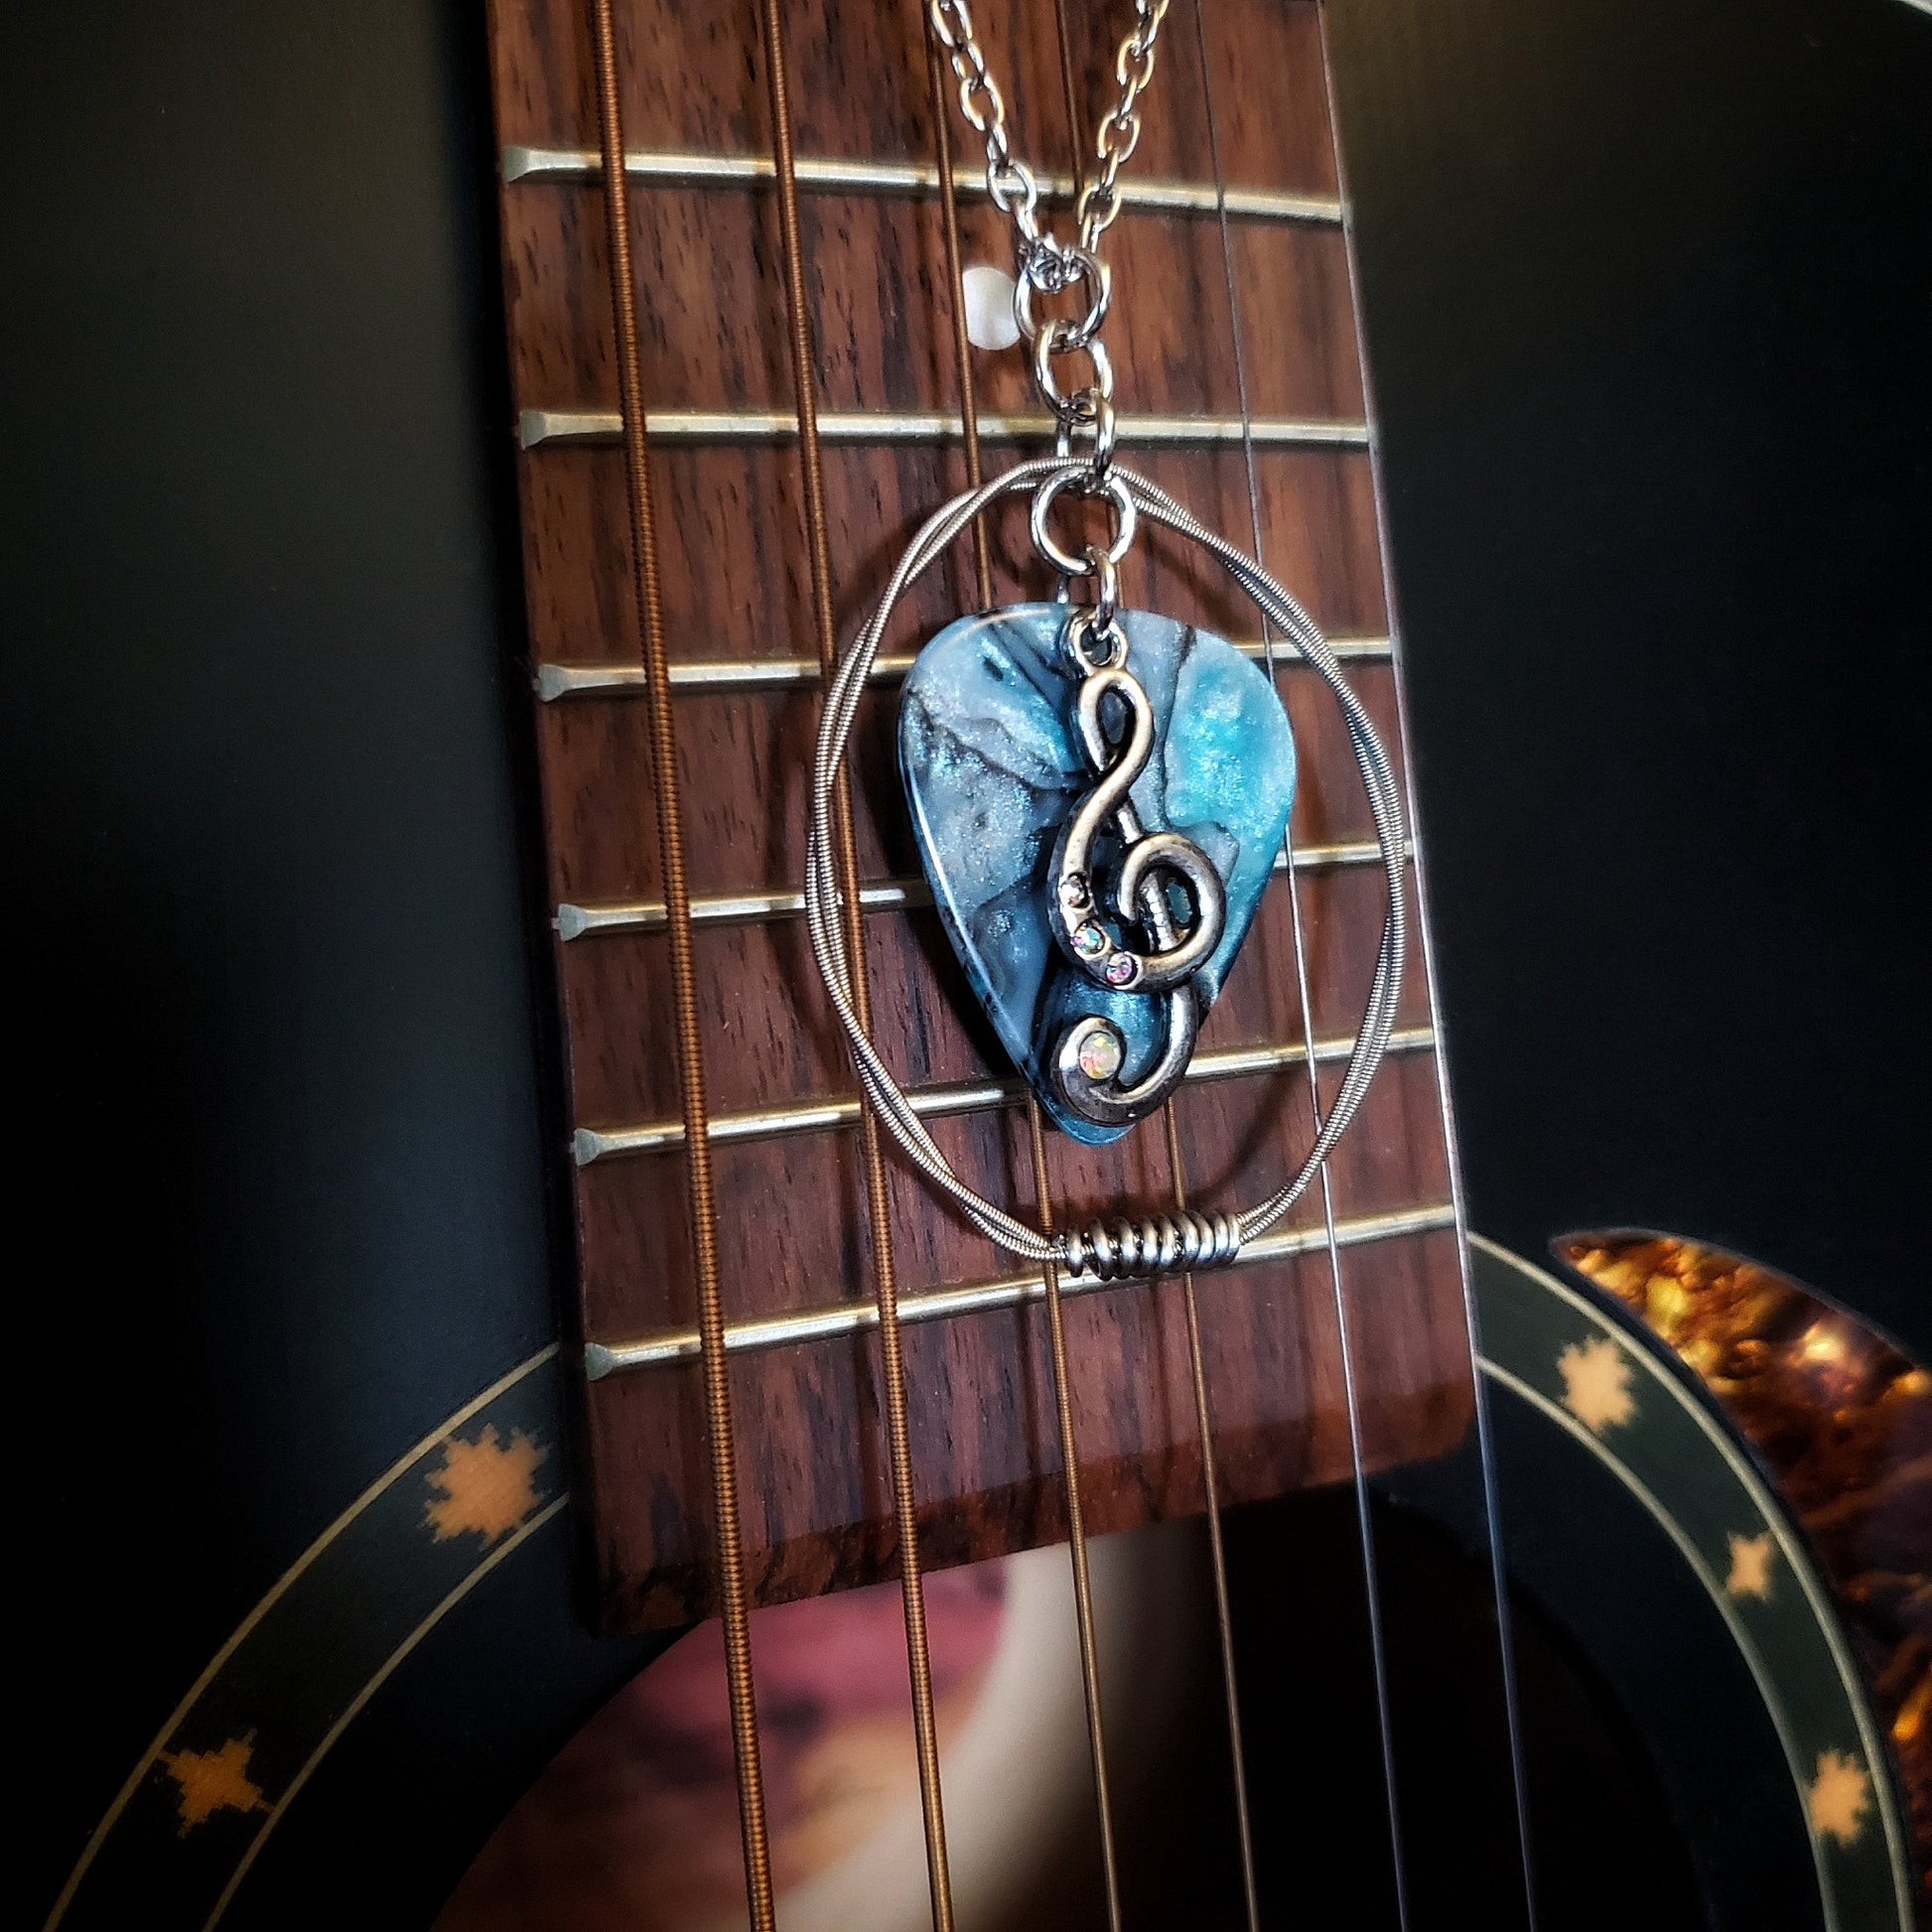 A necklace made from a blue marbled guitar pick and upcycled guitar strings with a silver coloured chain hangs in front of a black guitar